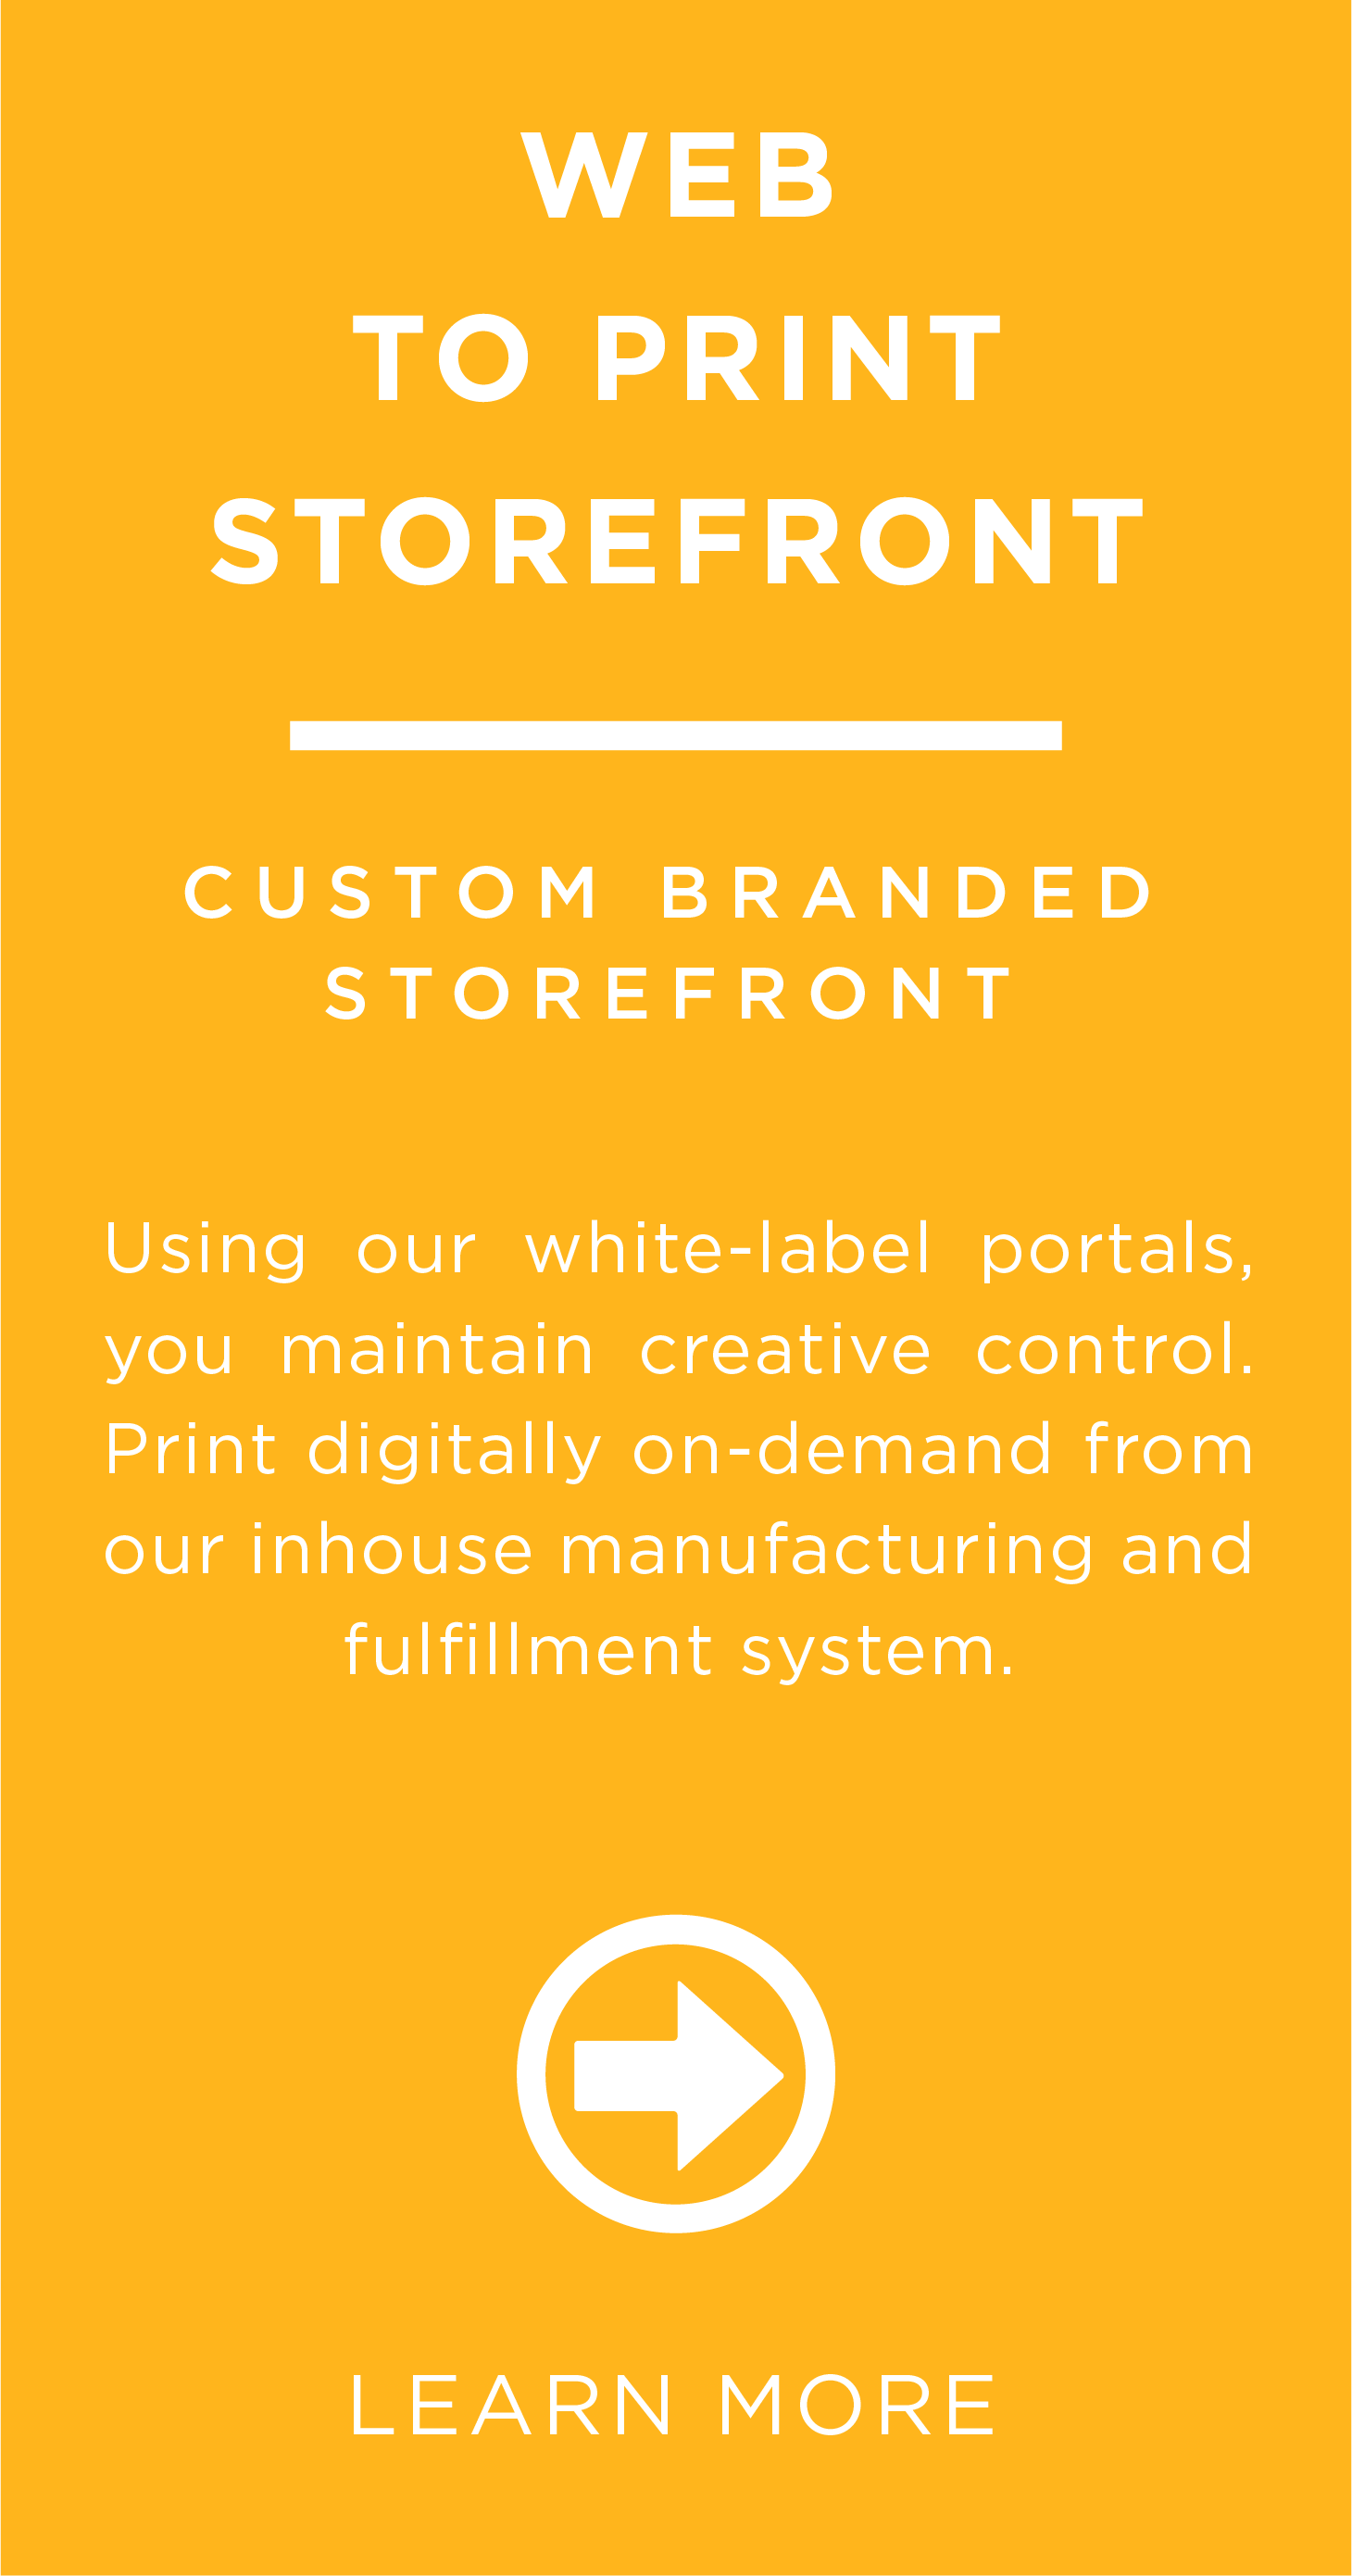 Using our white-label portals, you maintain creative control. Print digitally on-demand from our in-house manufacturing and fulfillment system.